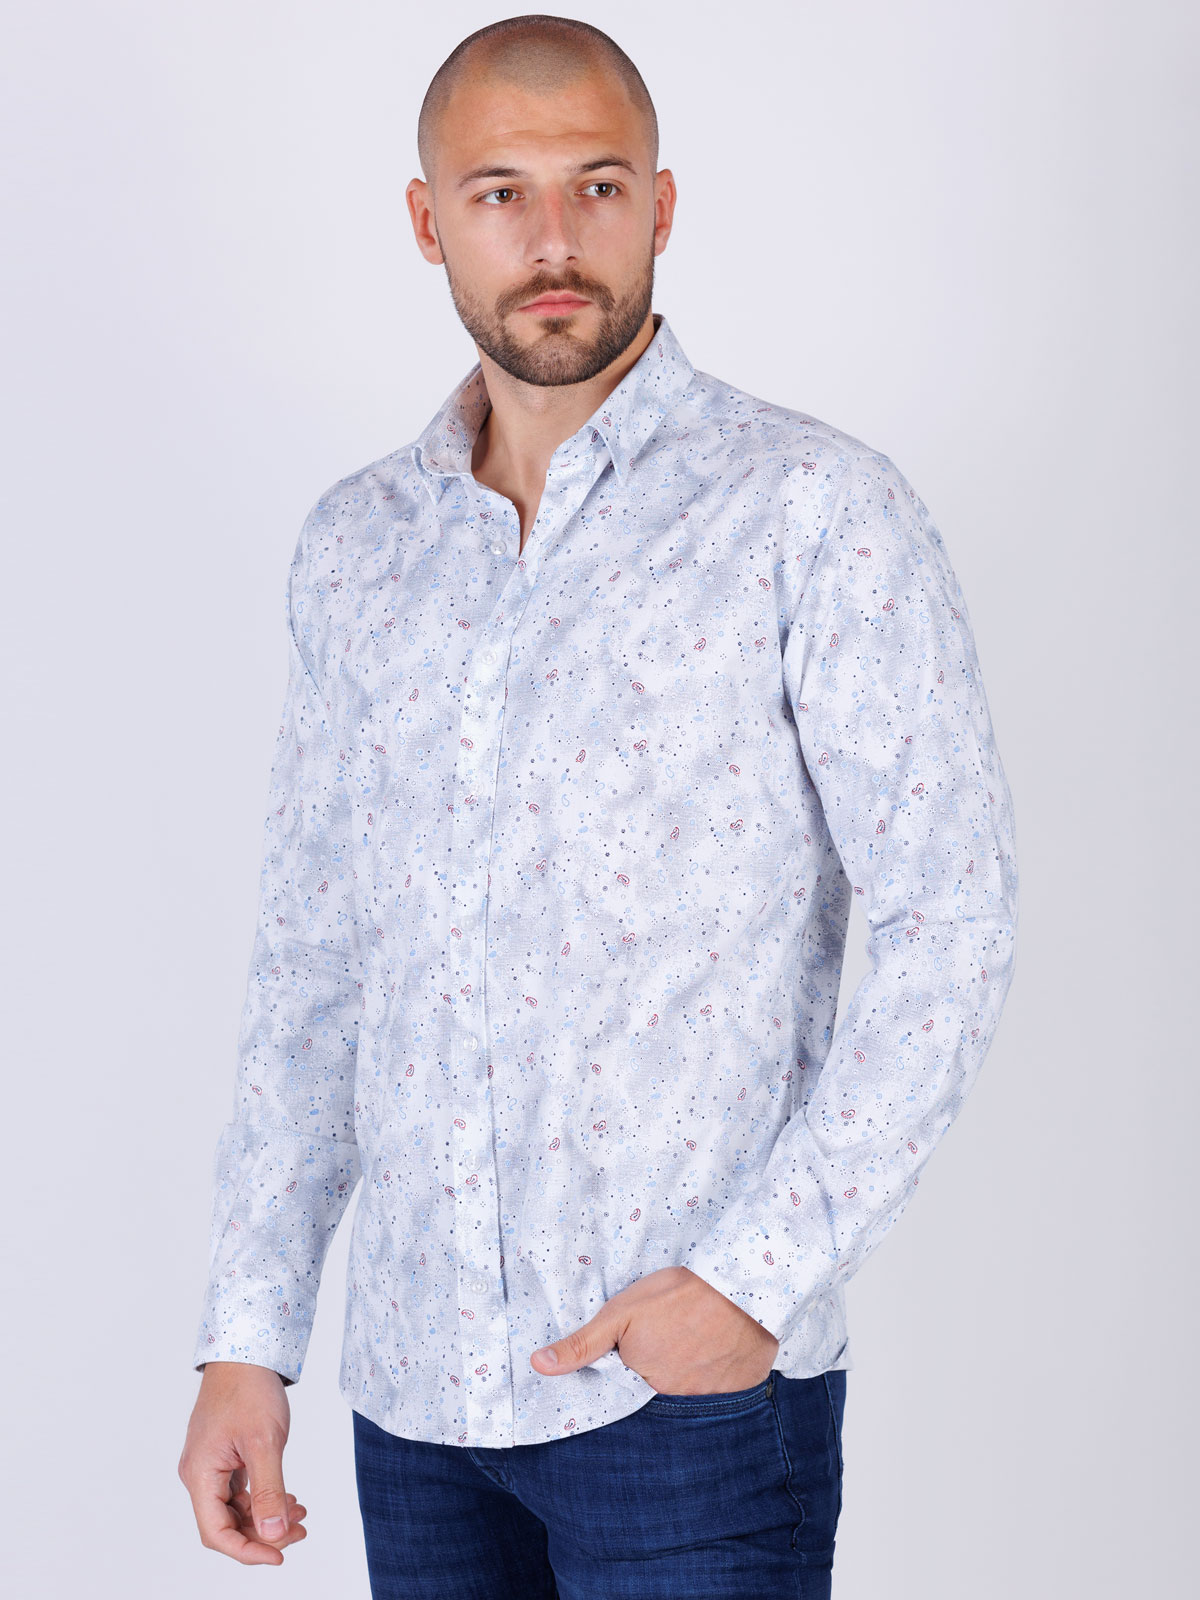 Shirt in white with blue paisley - 21543 € 43.87 img4